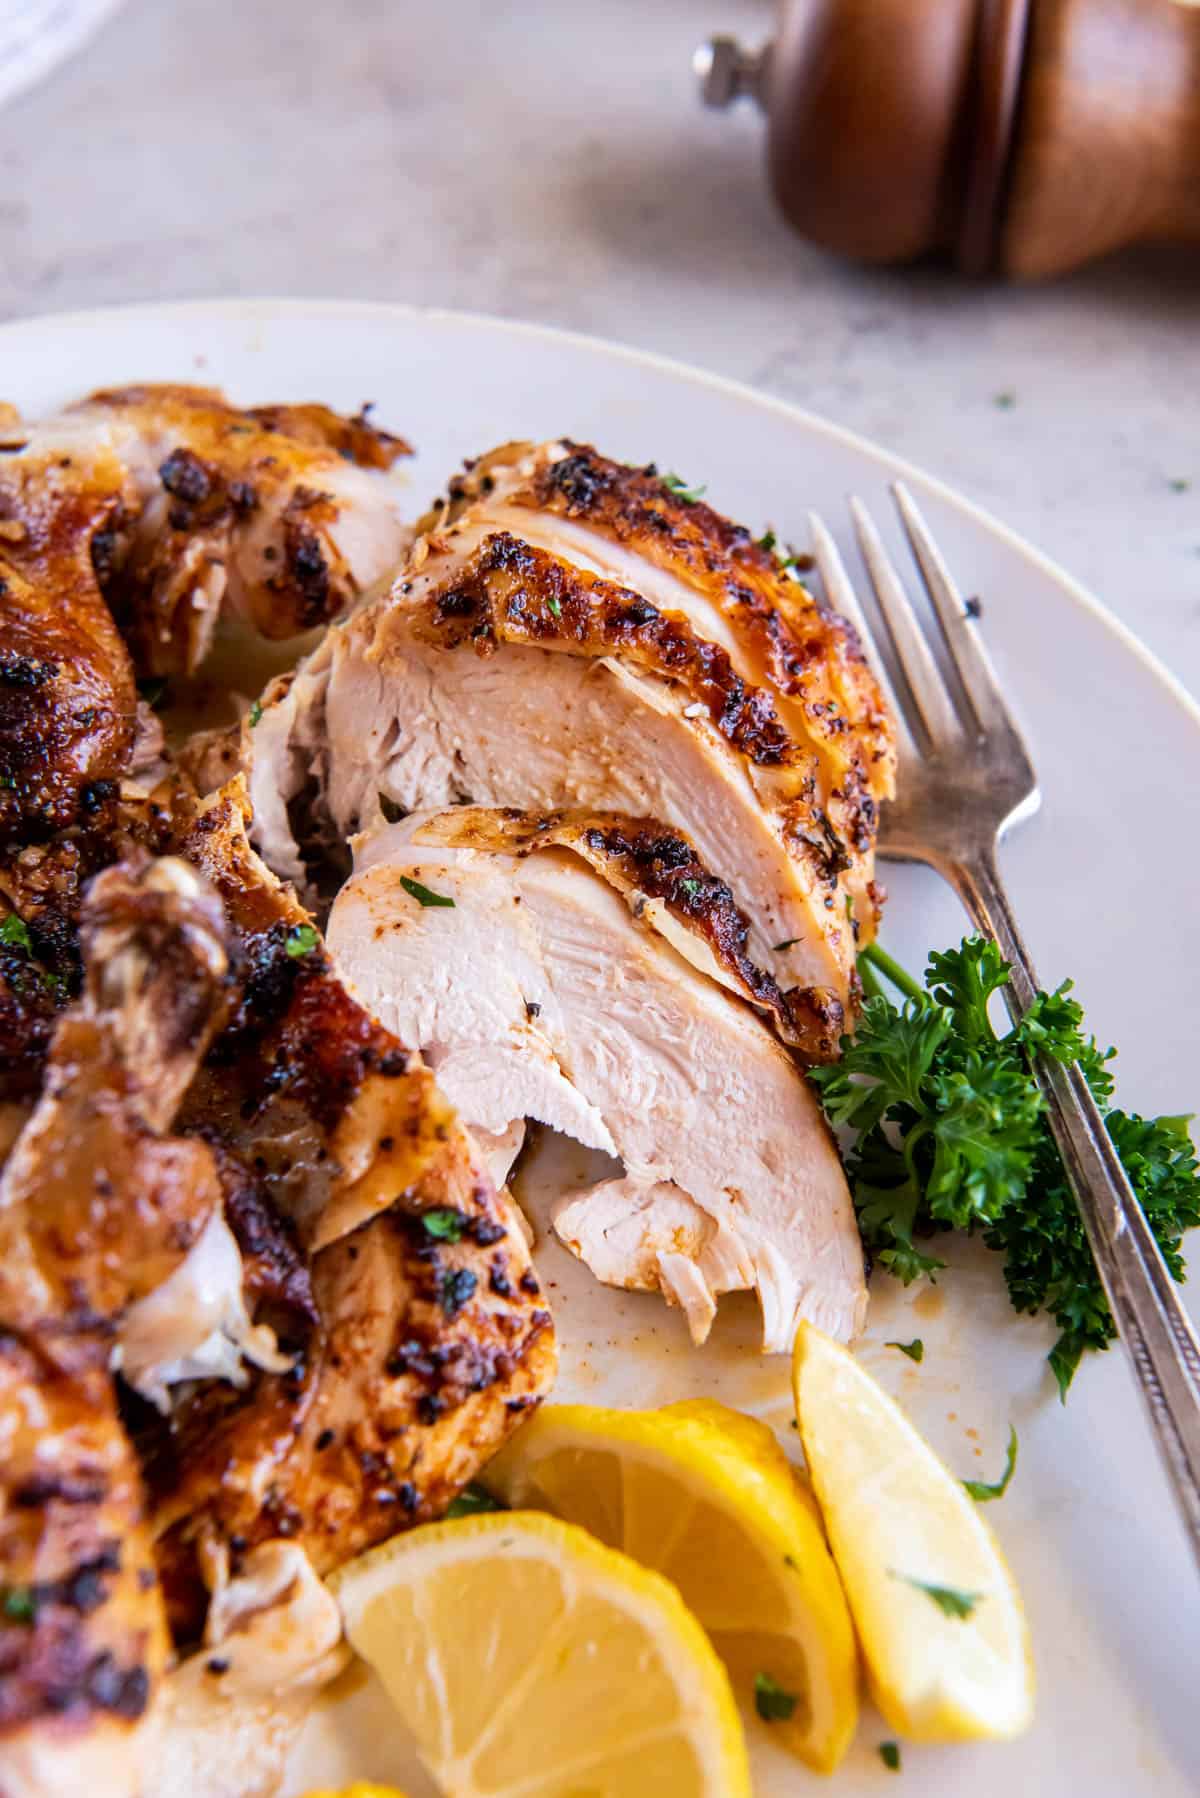 Oven roasted half chicken on a white plate sliced into small pieces for eating. A fork rests on the plate and a lemon wedge is on the side for serving.